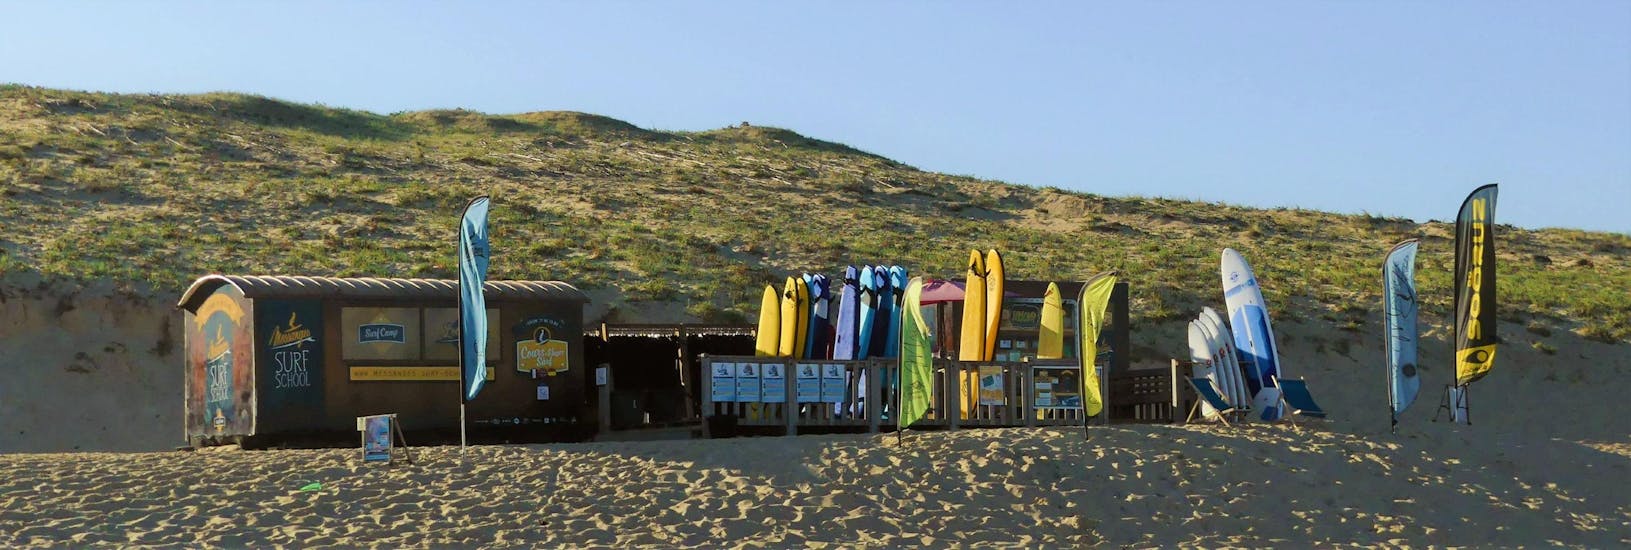 The base of Messanges Surf School on Messanges South Beach where Surfing Lessons for Kids (6-8 y.) take place.